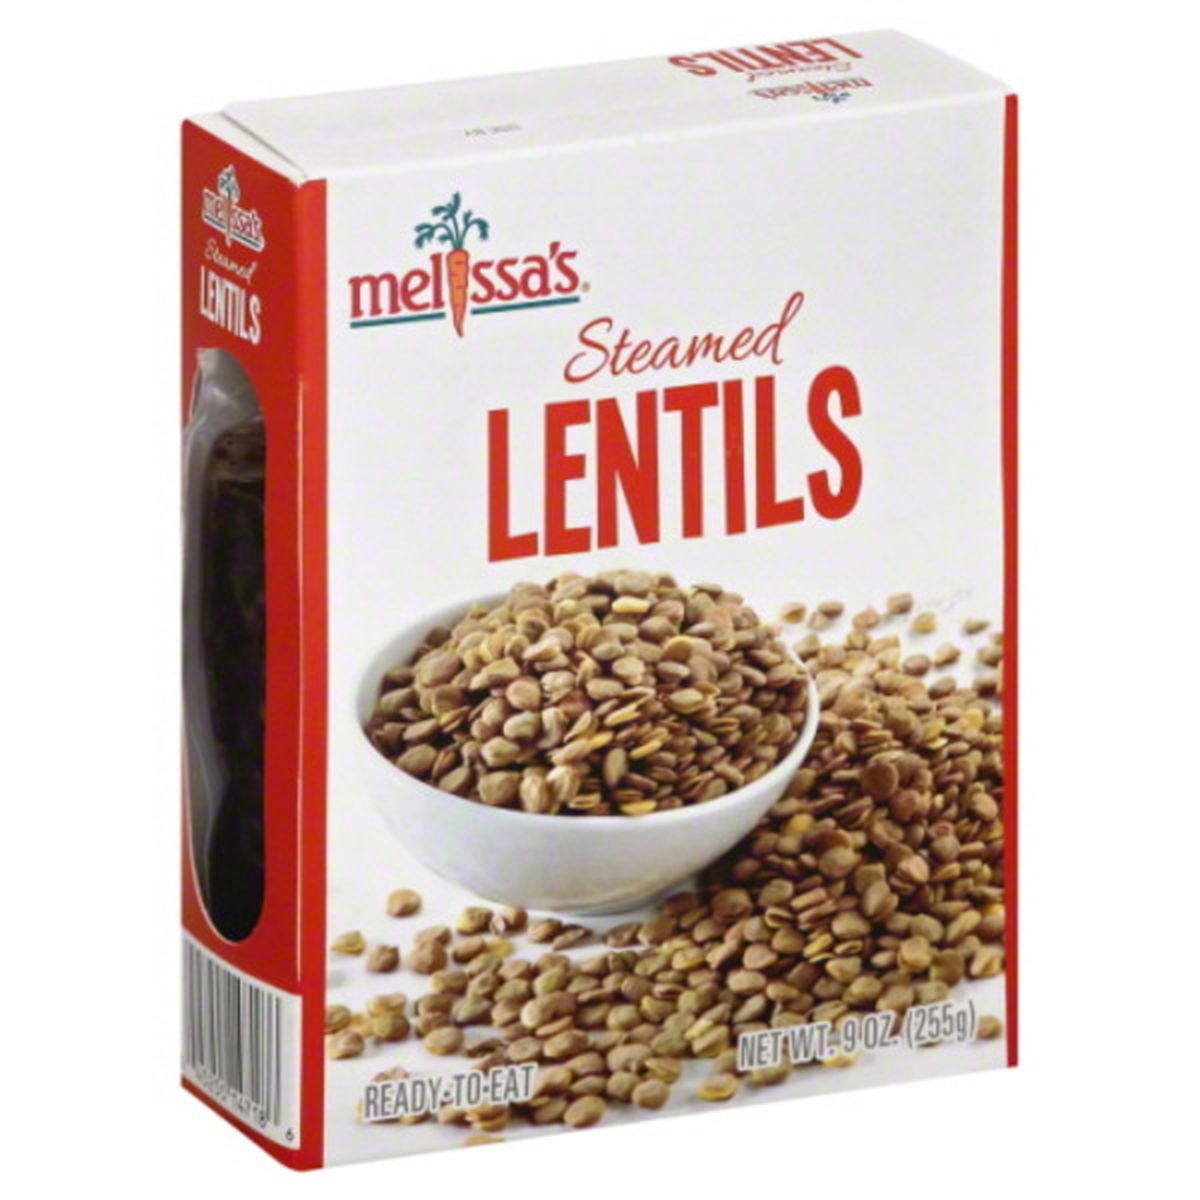 Calories in Melissa's Lentils, Steamed